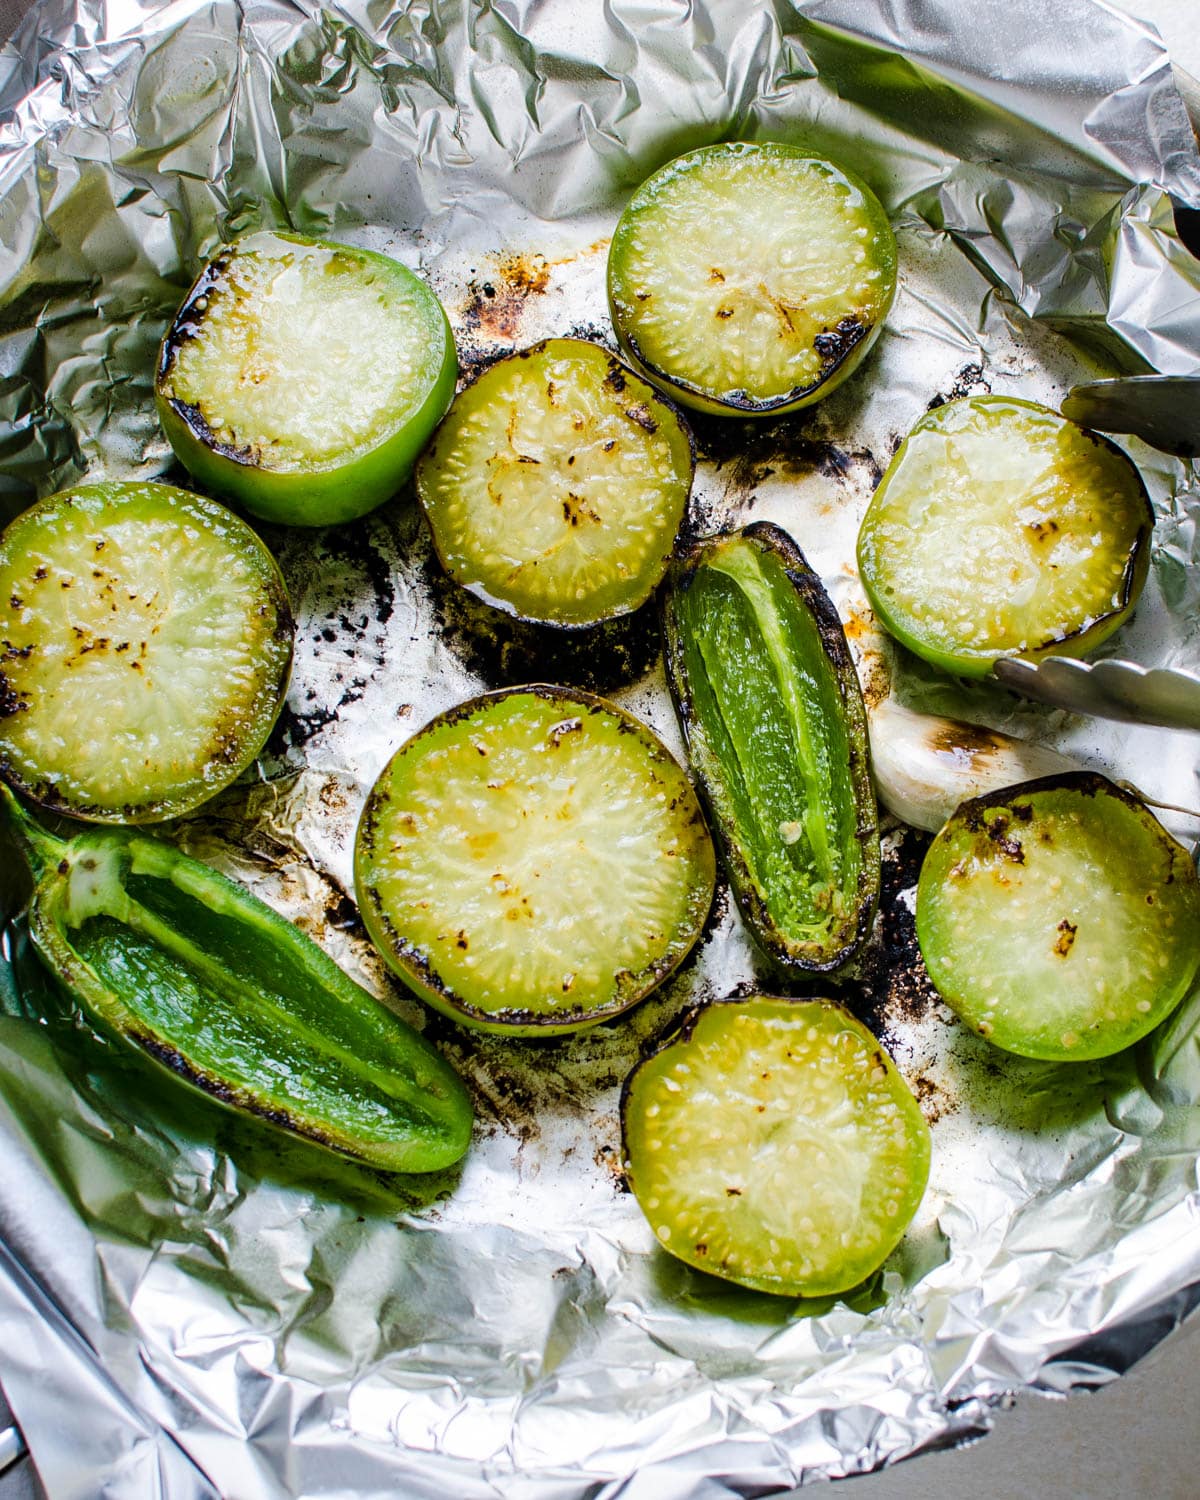 Cooking the tomatillos, garlic and jalapenos in a skillet covered with foil.